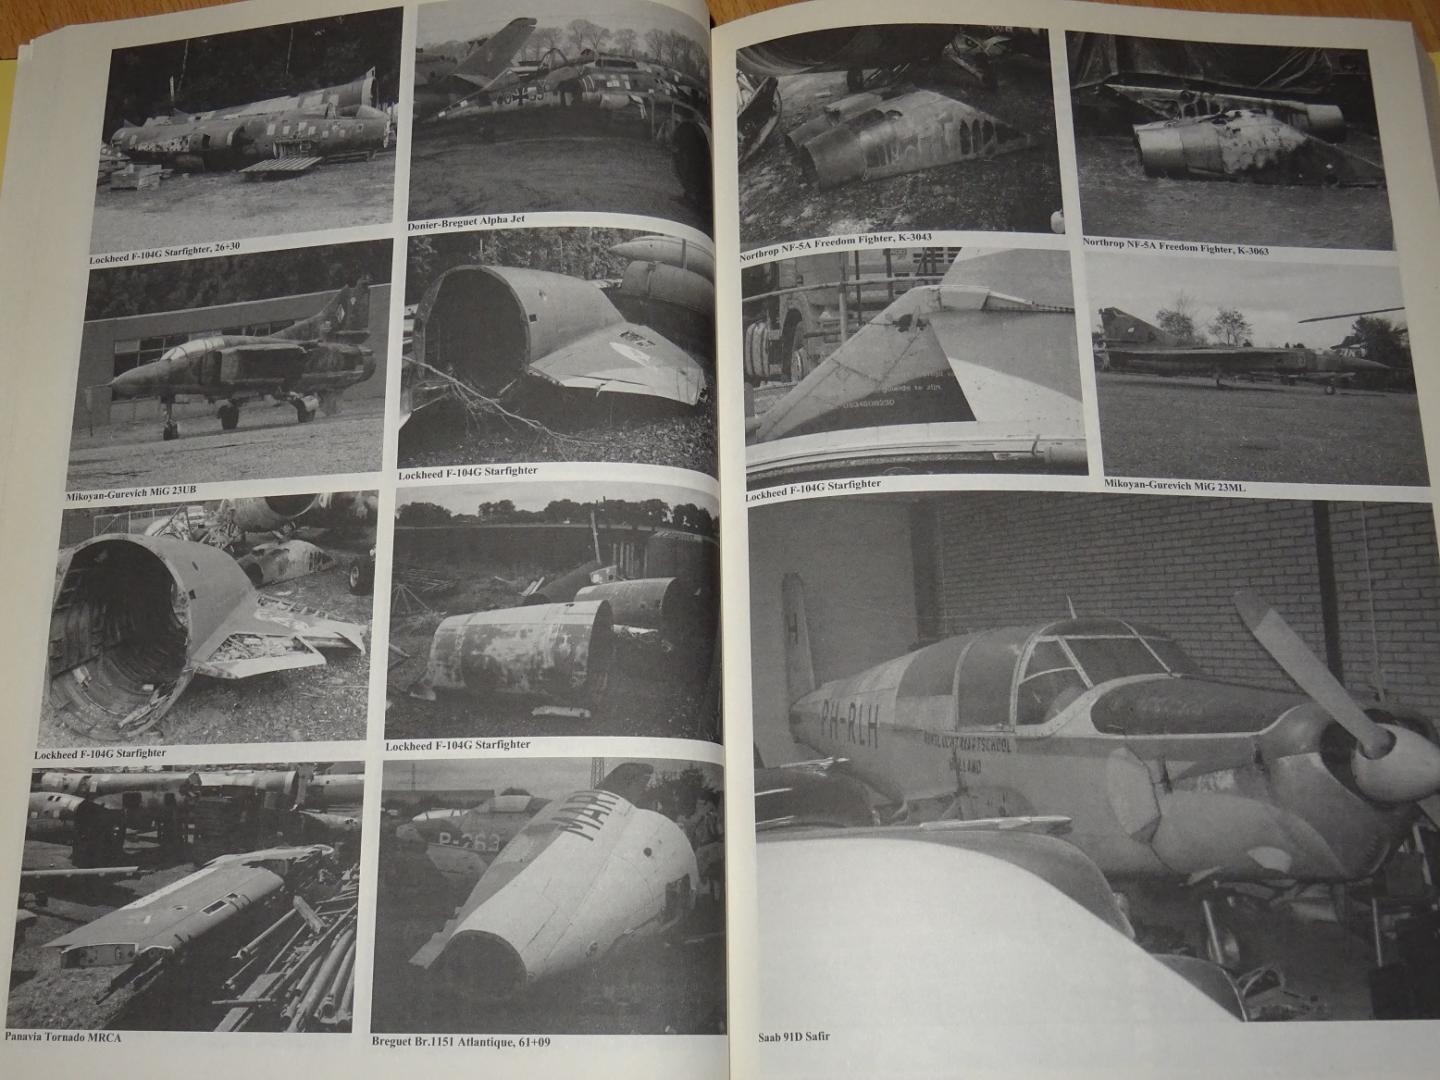 Plomp, Pieter - Military wrecks, preserved, stored and instructional airframes of the BeNeLux